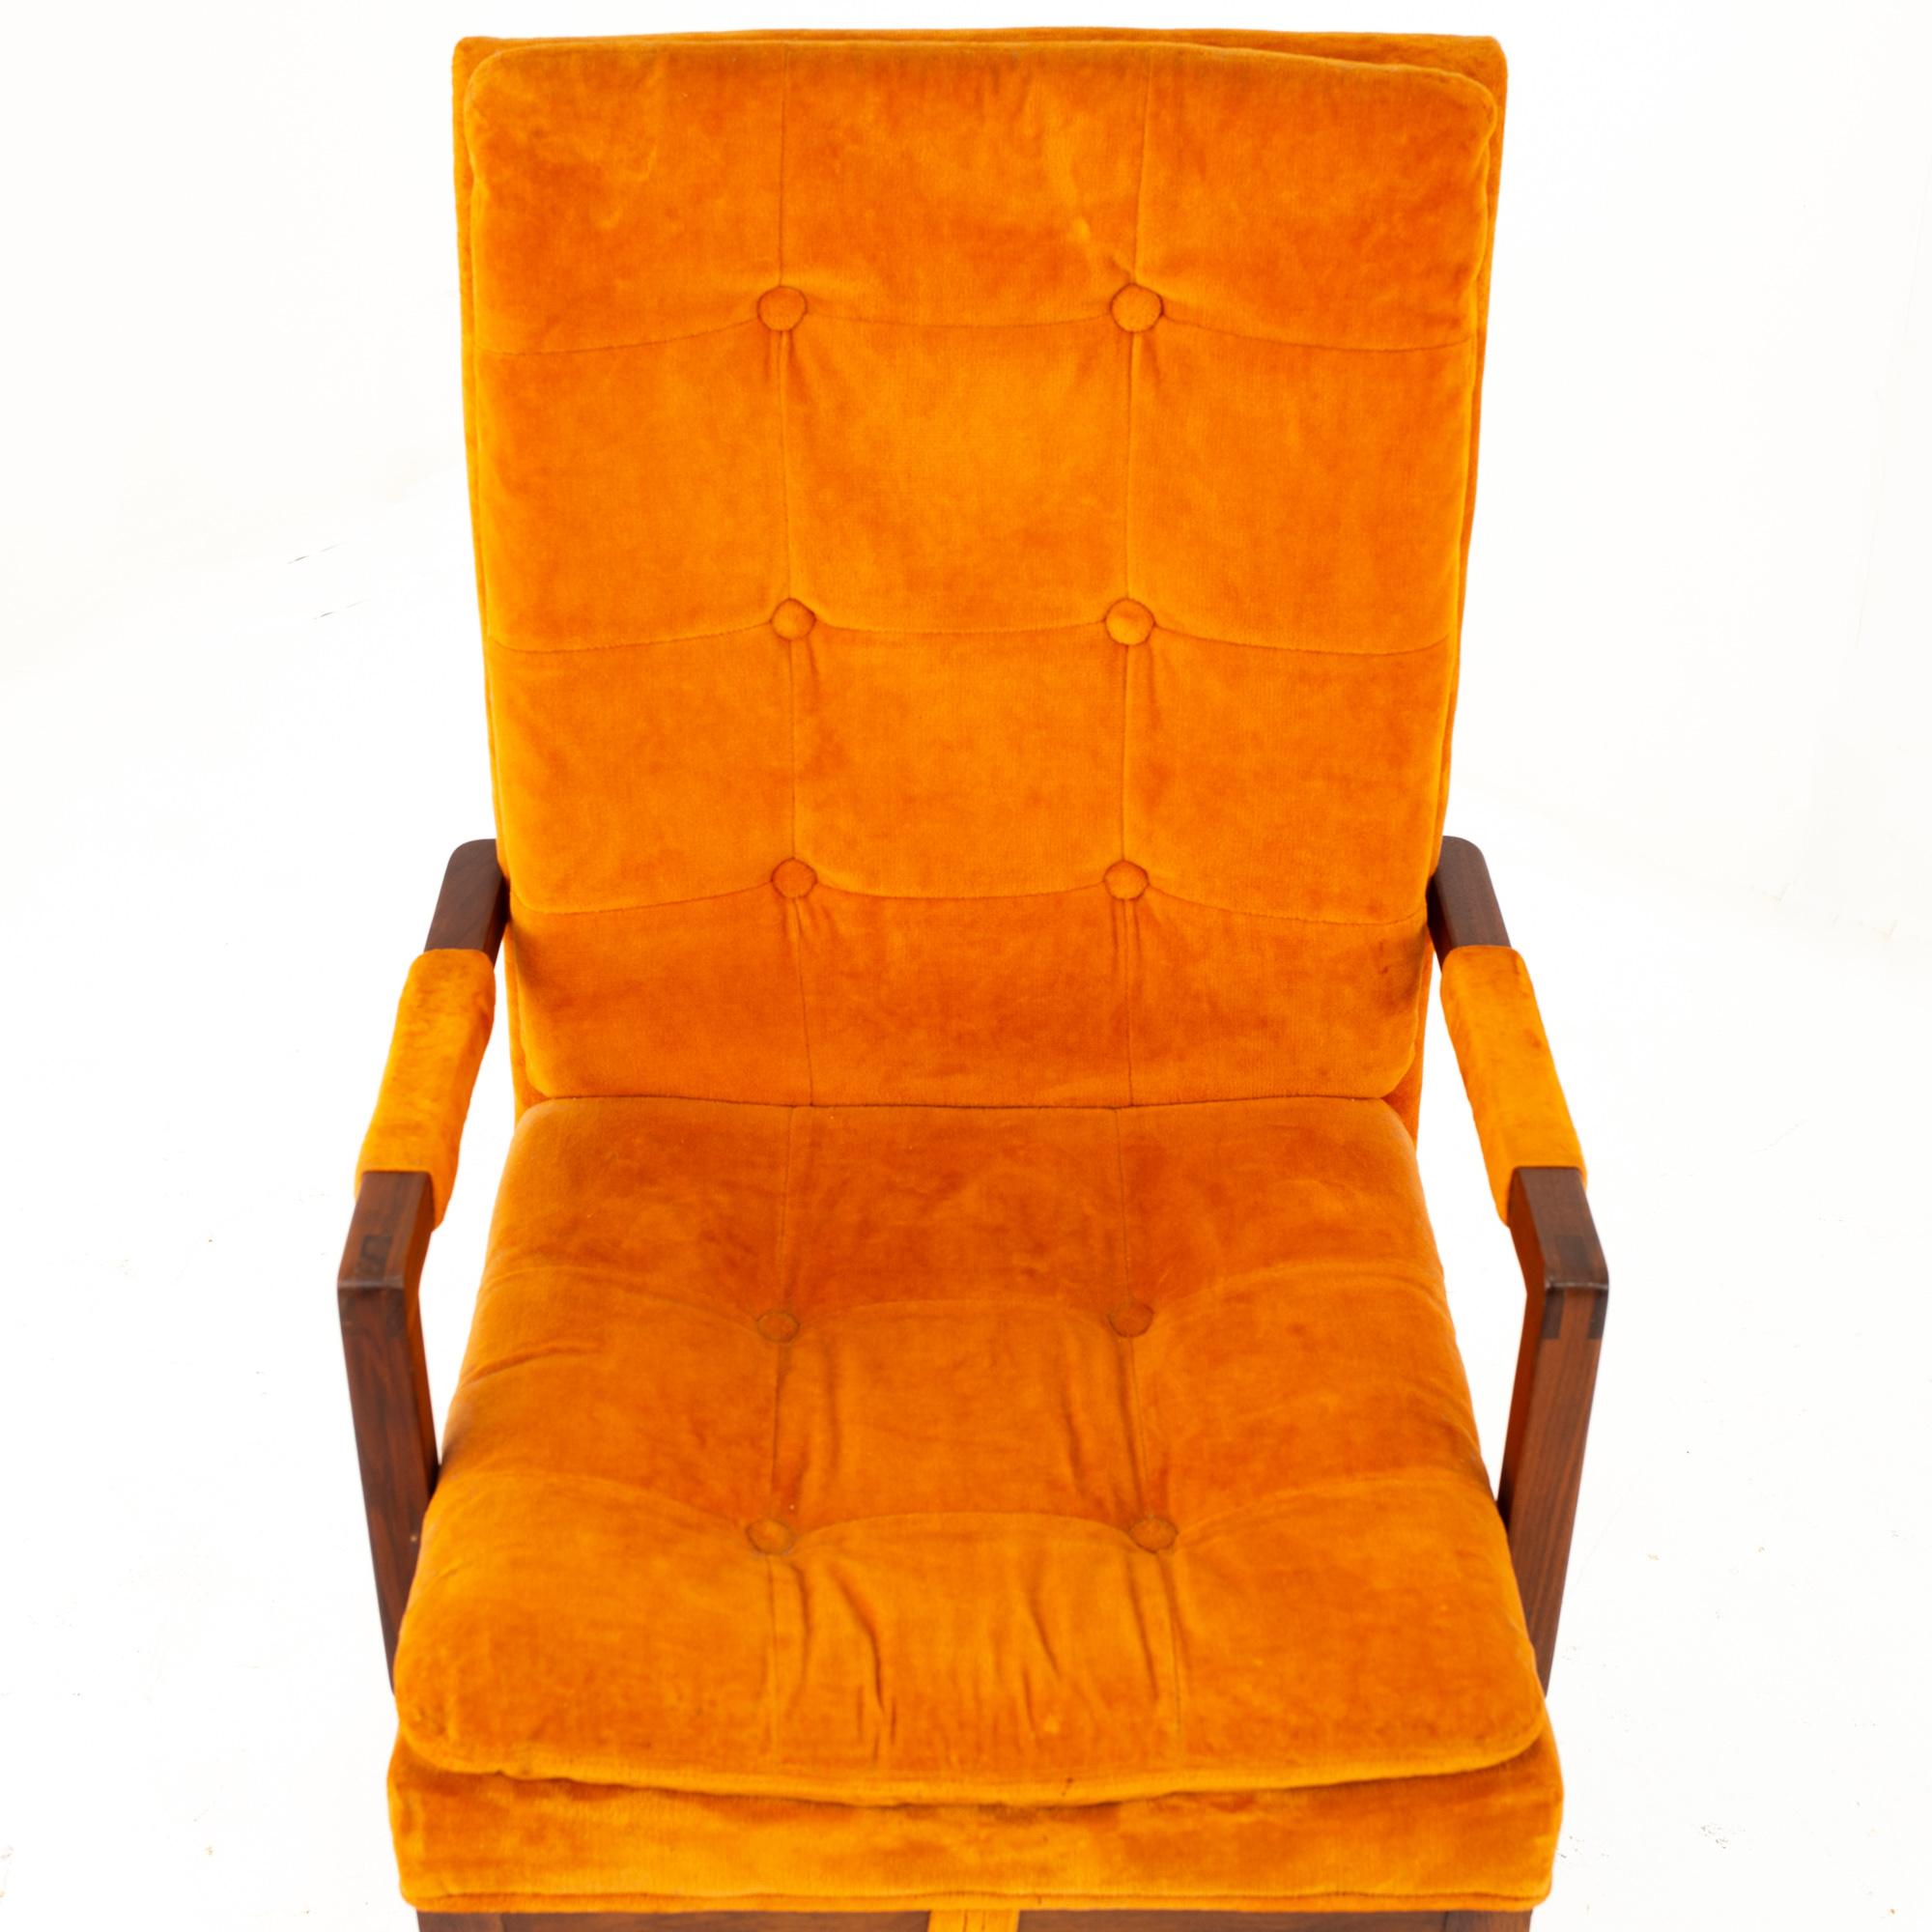 American Milo Baughman Style Dillingham Orange and Walnut Upholstered Dining Chairs - Set